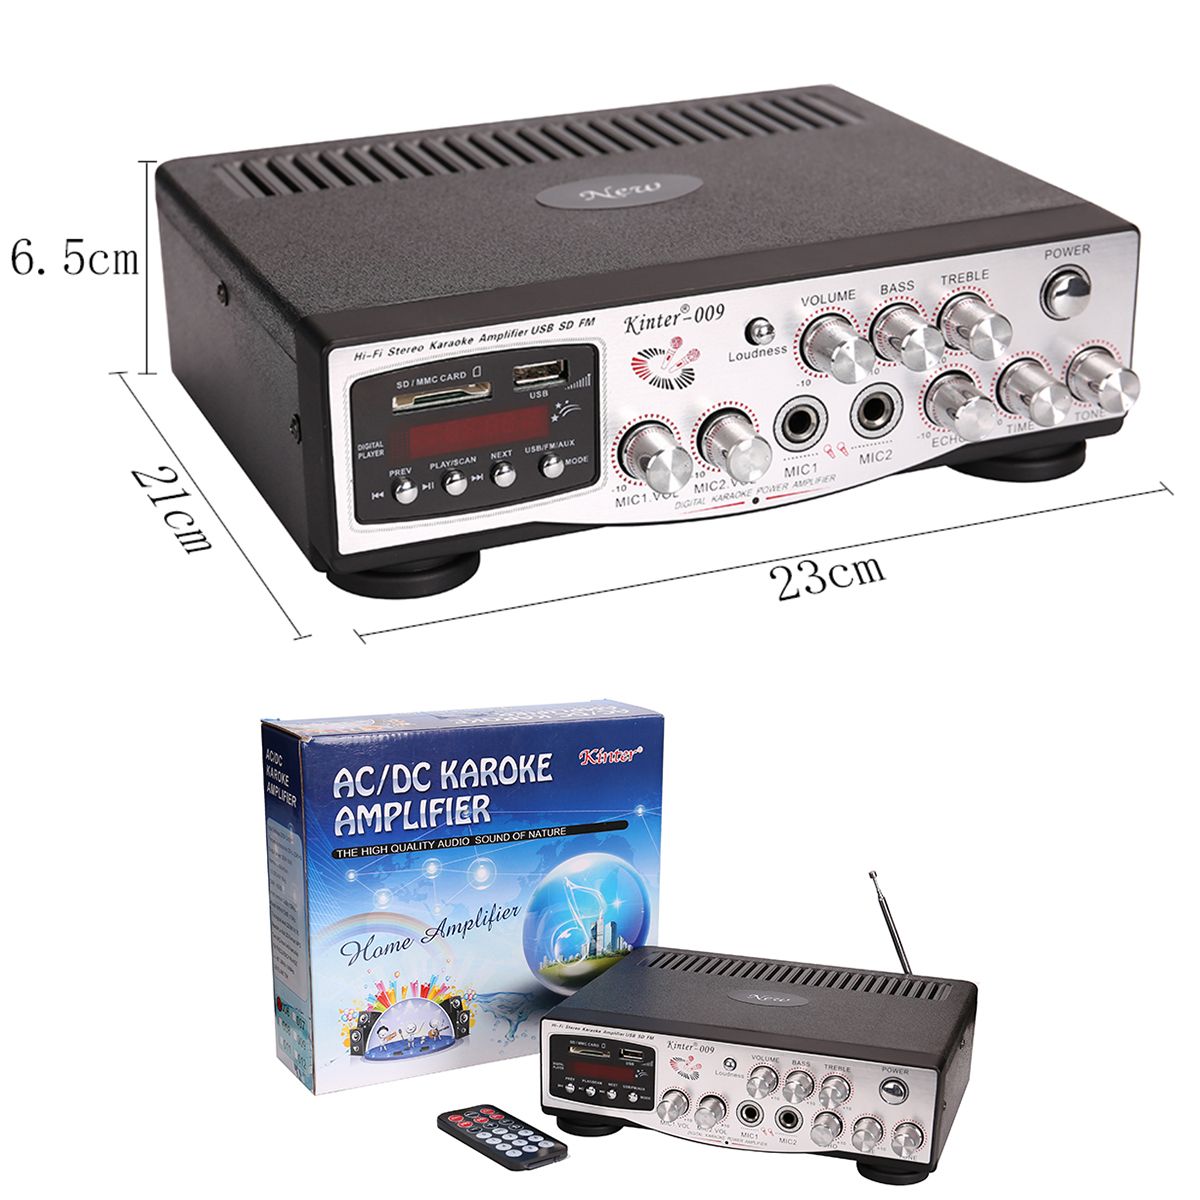 Kinter-009-2x100W-HIFI-Lossless-Amplifier-220V-with-Remote-Control-Support-Memory-Card-USB-FM-Microp-1559946